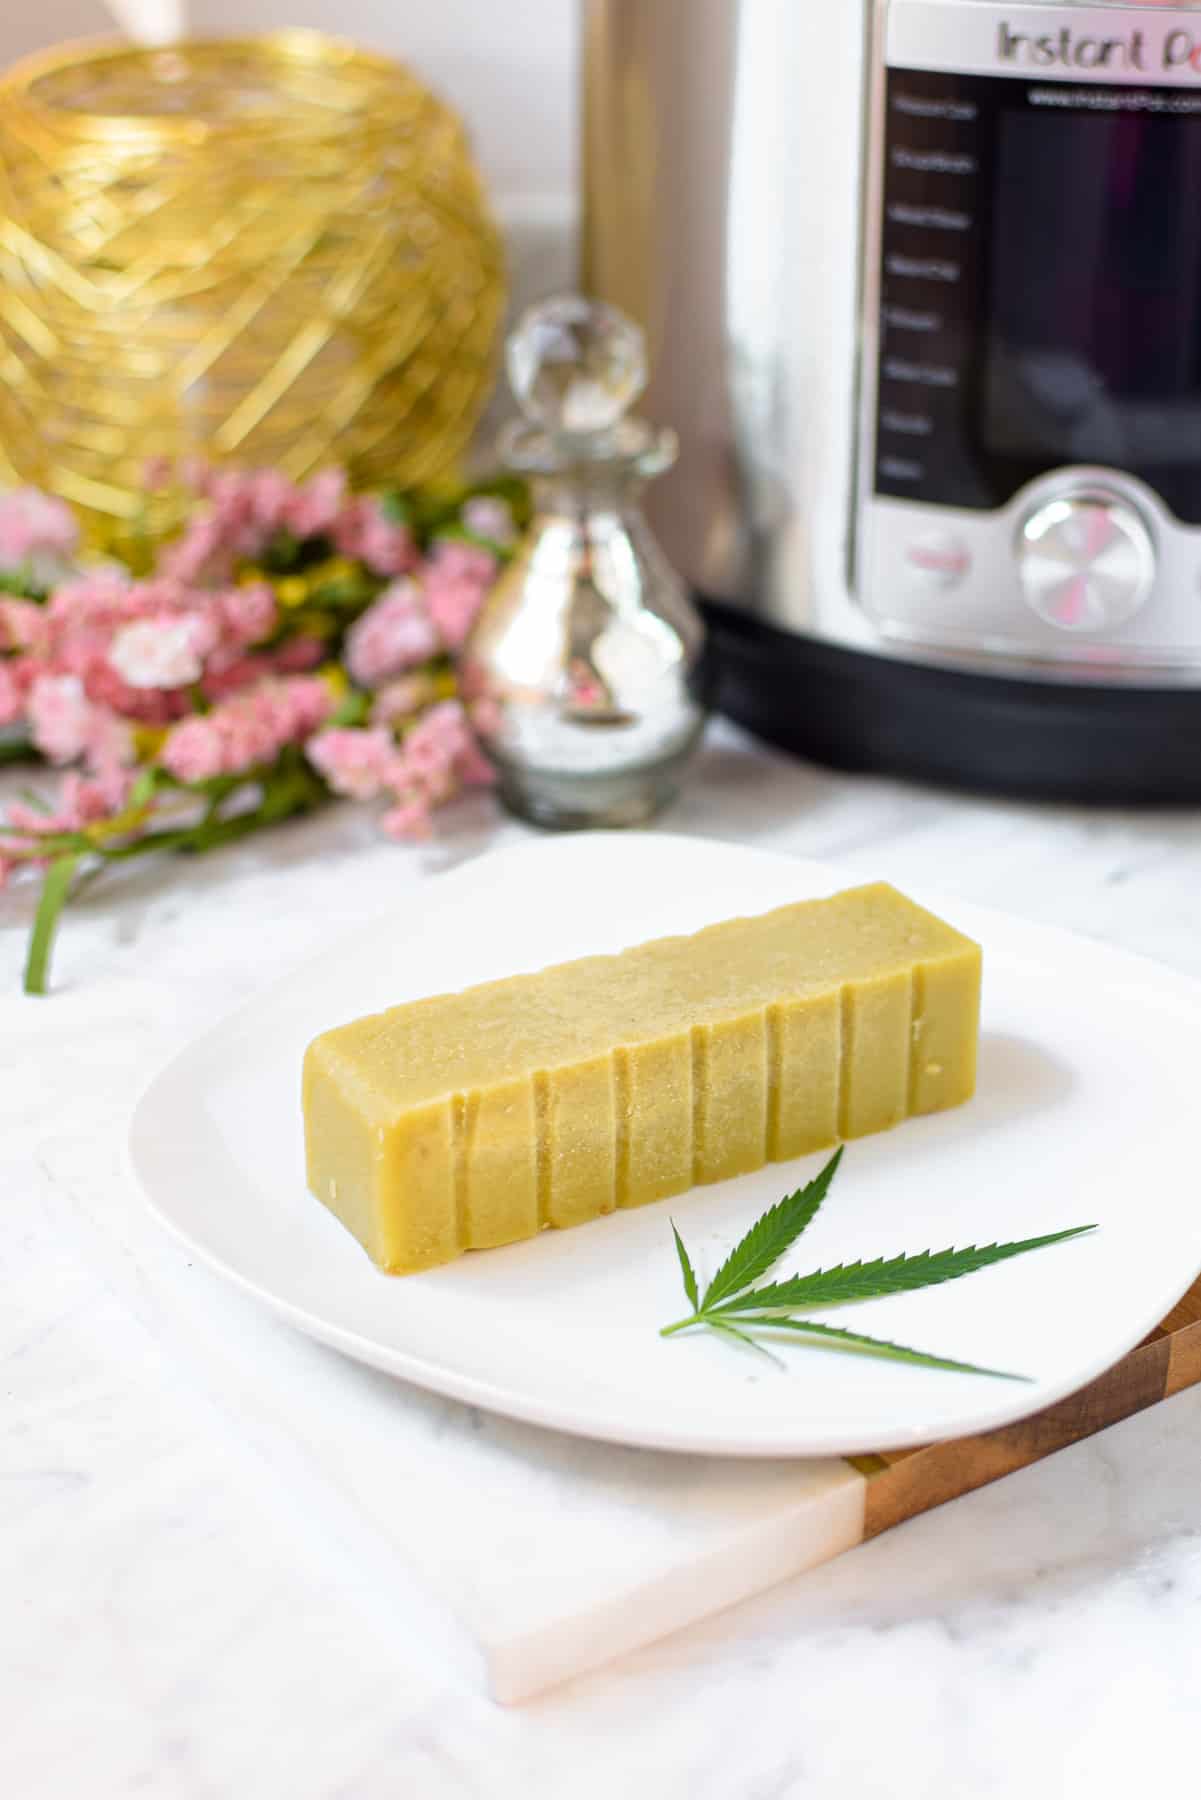 does microwaving cannabutter ruin it